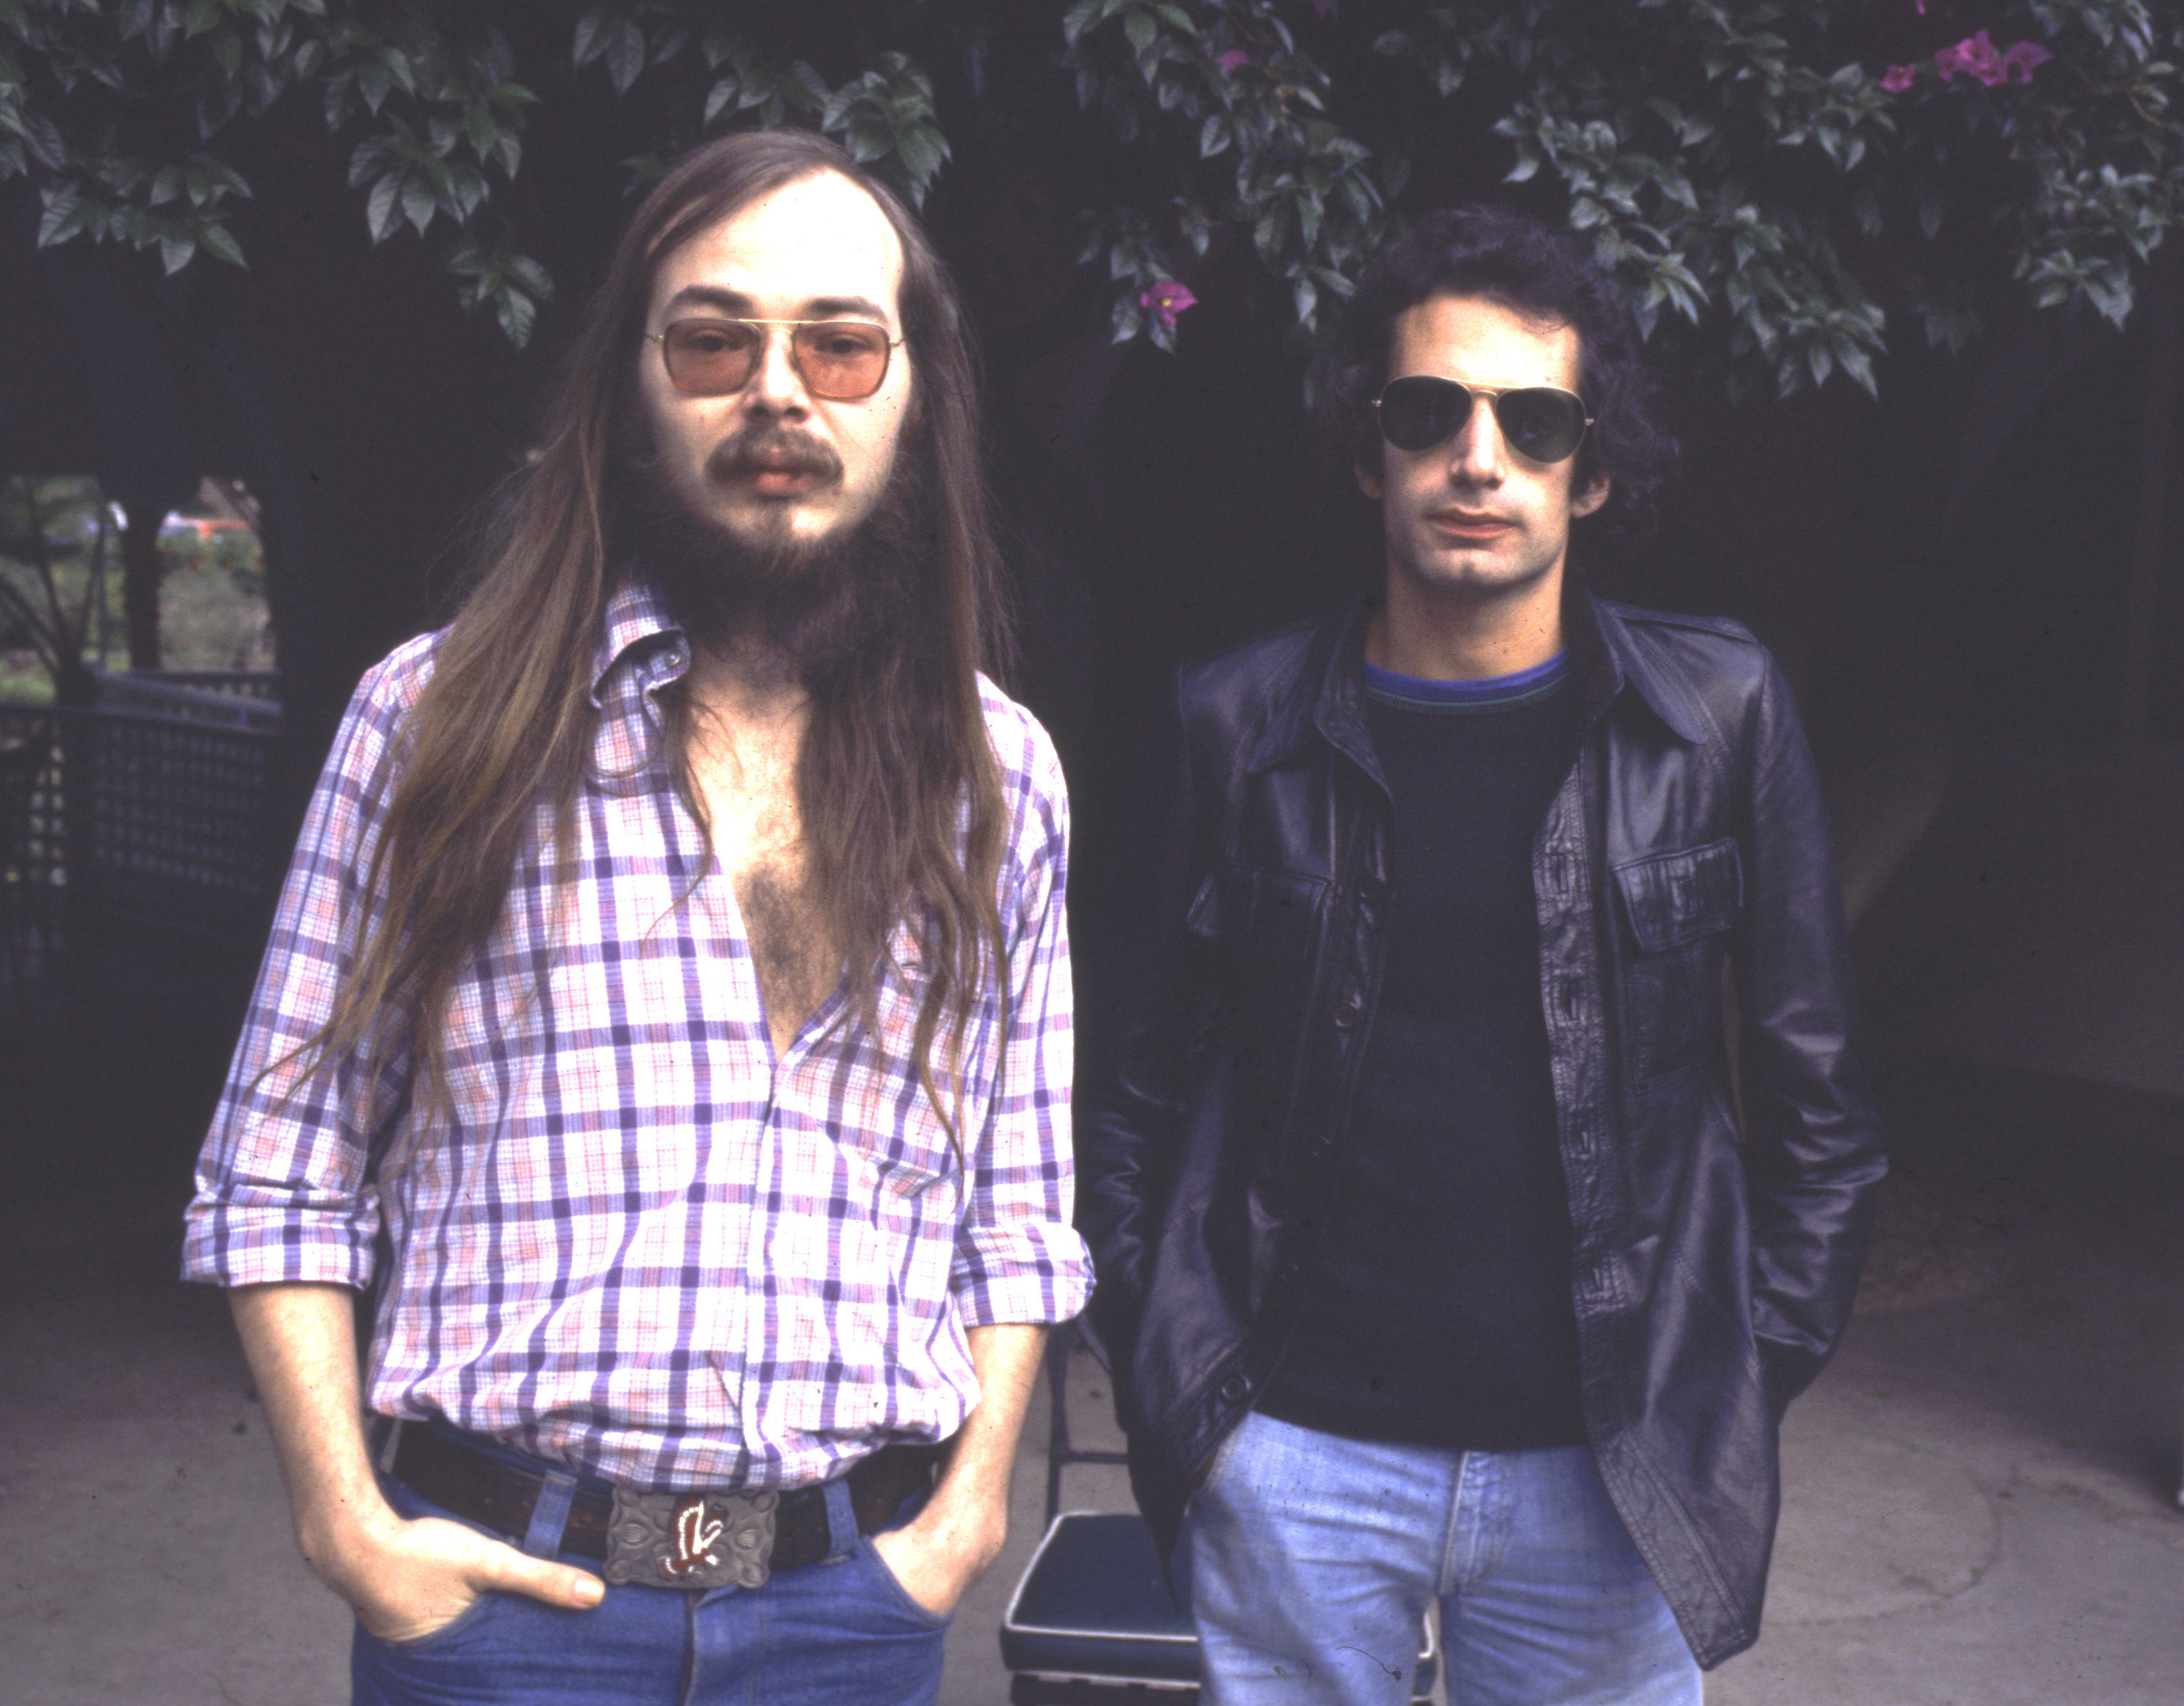 <p>Steely Dan was, in its prime, under the direction of celebrated songwriters Donald Fagan and Walter Becker, many things regarding a collective sound. Rock, pop, jazz, blues. Usually melodic, well within the soft-rock category. Songs like <a href="https://www.youtube.com/watch?v=LI7NDDQLvbo">"Peg,"</a> from the 1977 masterpiece <em>Aja</em>, certainly has a yacht rock vibe, too. Perhaps most notably is that the great Michael McDonald, longtime frontman of the Doobie Brothers and driving singer-songwriter in the soft/yacht rock circles, provides backing vocals on the track. </p><p>You may also like: <a href='https://www.yardbarker.com/entertainment/articles/21st_century_tv_shows_canceled_too_soon_113023/s1__38890714'>21st-century TV shows canceled too soon</a></p>